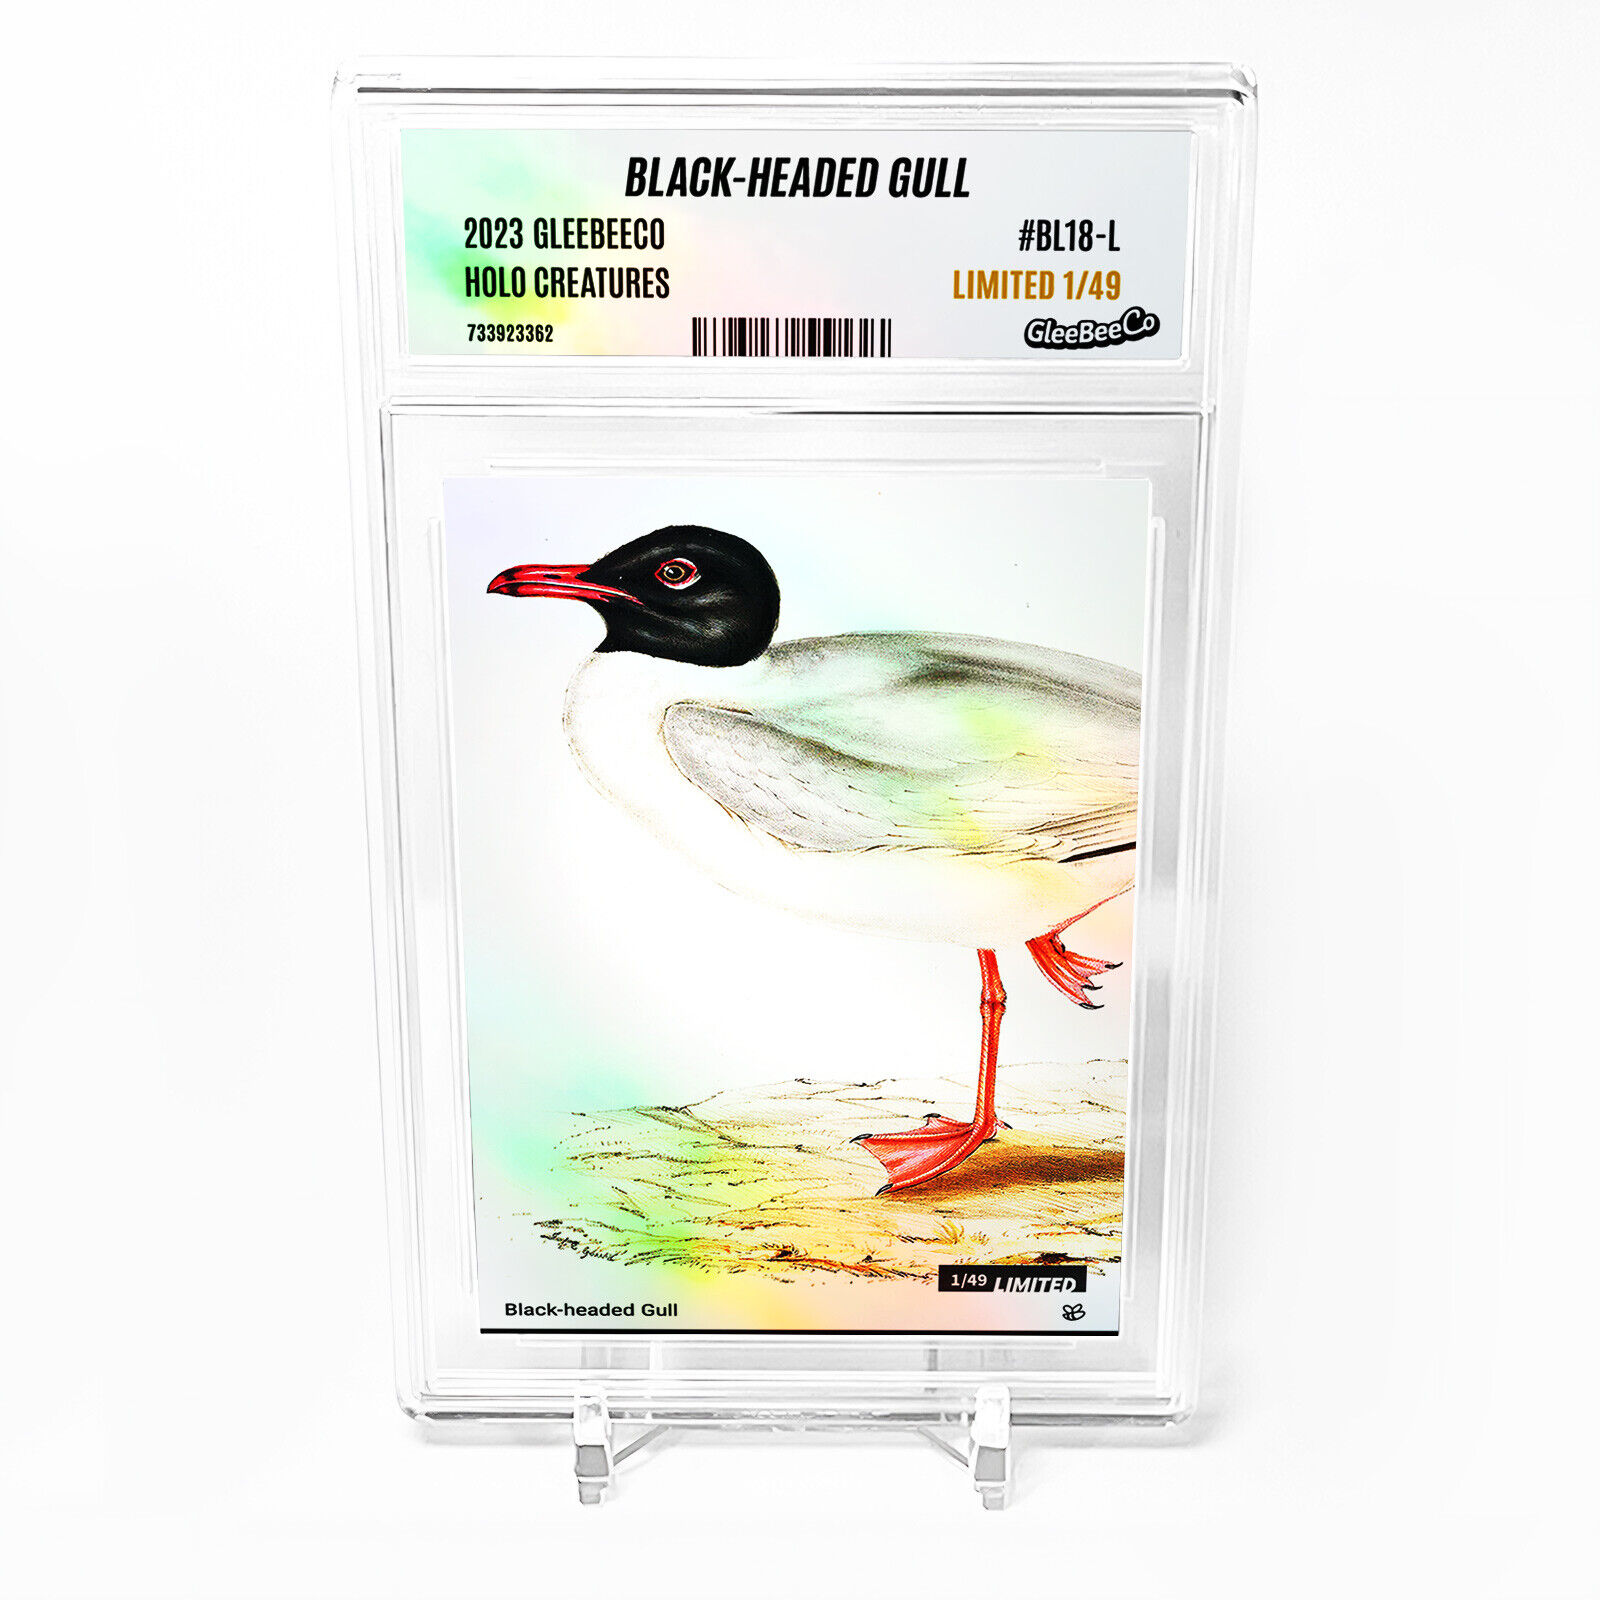 BLACK-HEADED GULL Card 2023 GleeBeeCo Holo Creatures #BL18-L Limited to Only /49